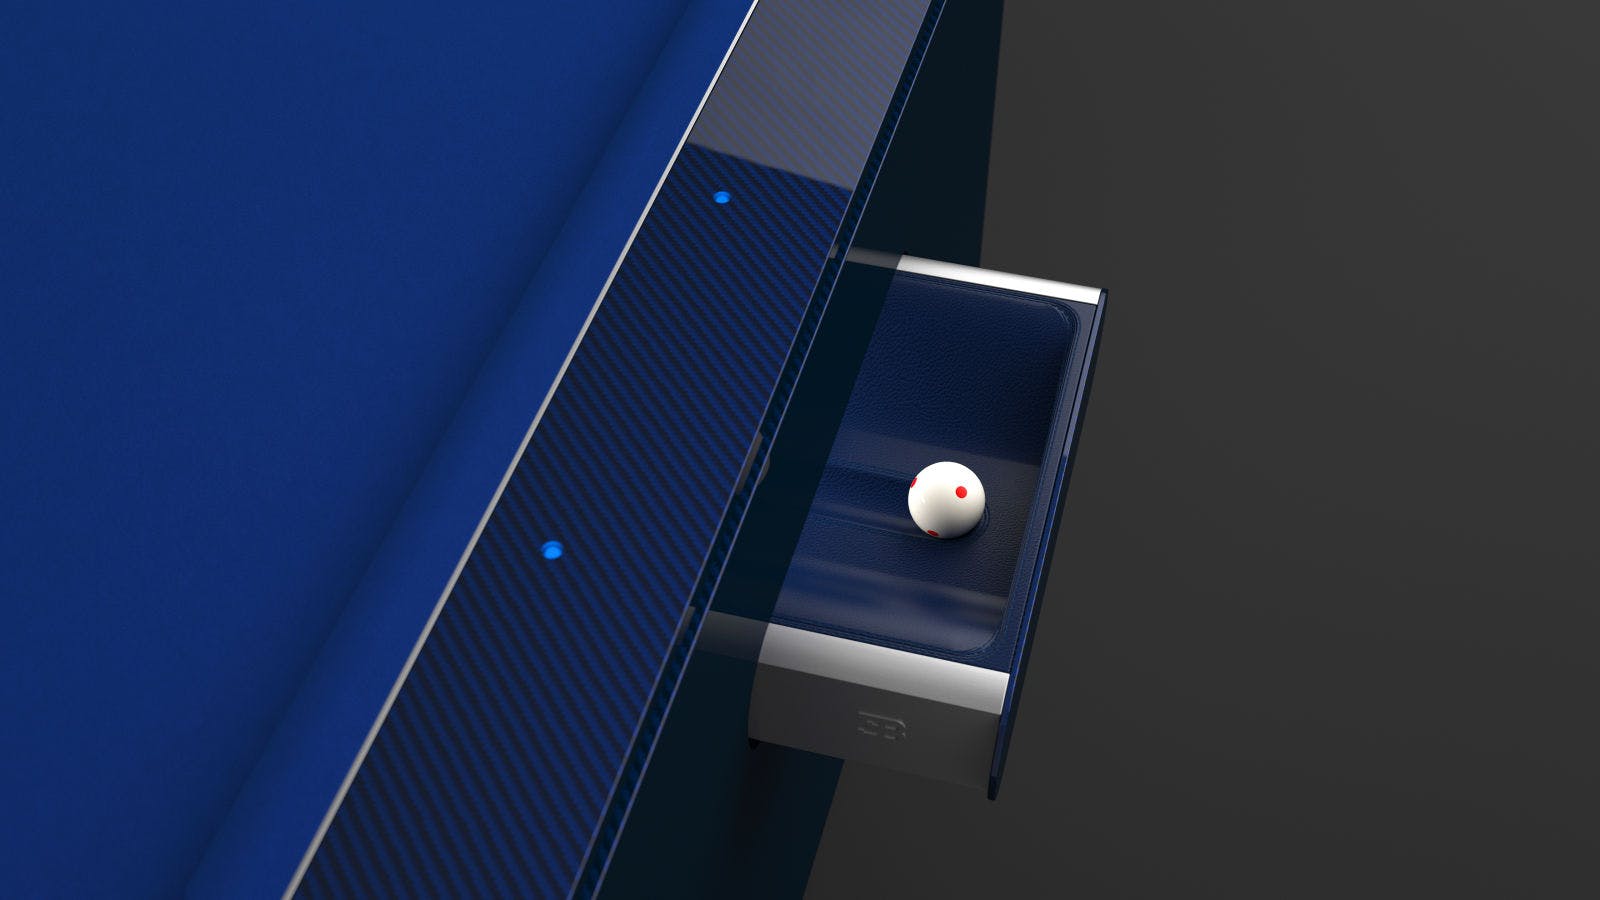 The sides of the drawers of the Pool Table are manufactured with CNC-machined, brushed and anodized aluminum, complete with the Bugatti logo.